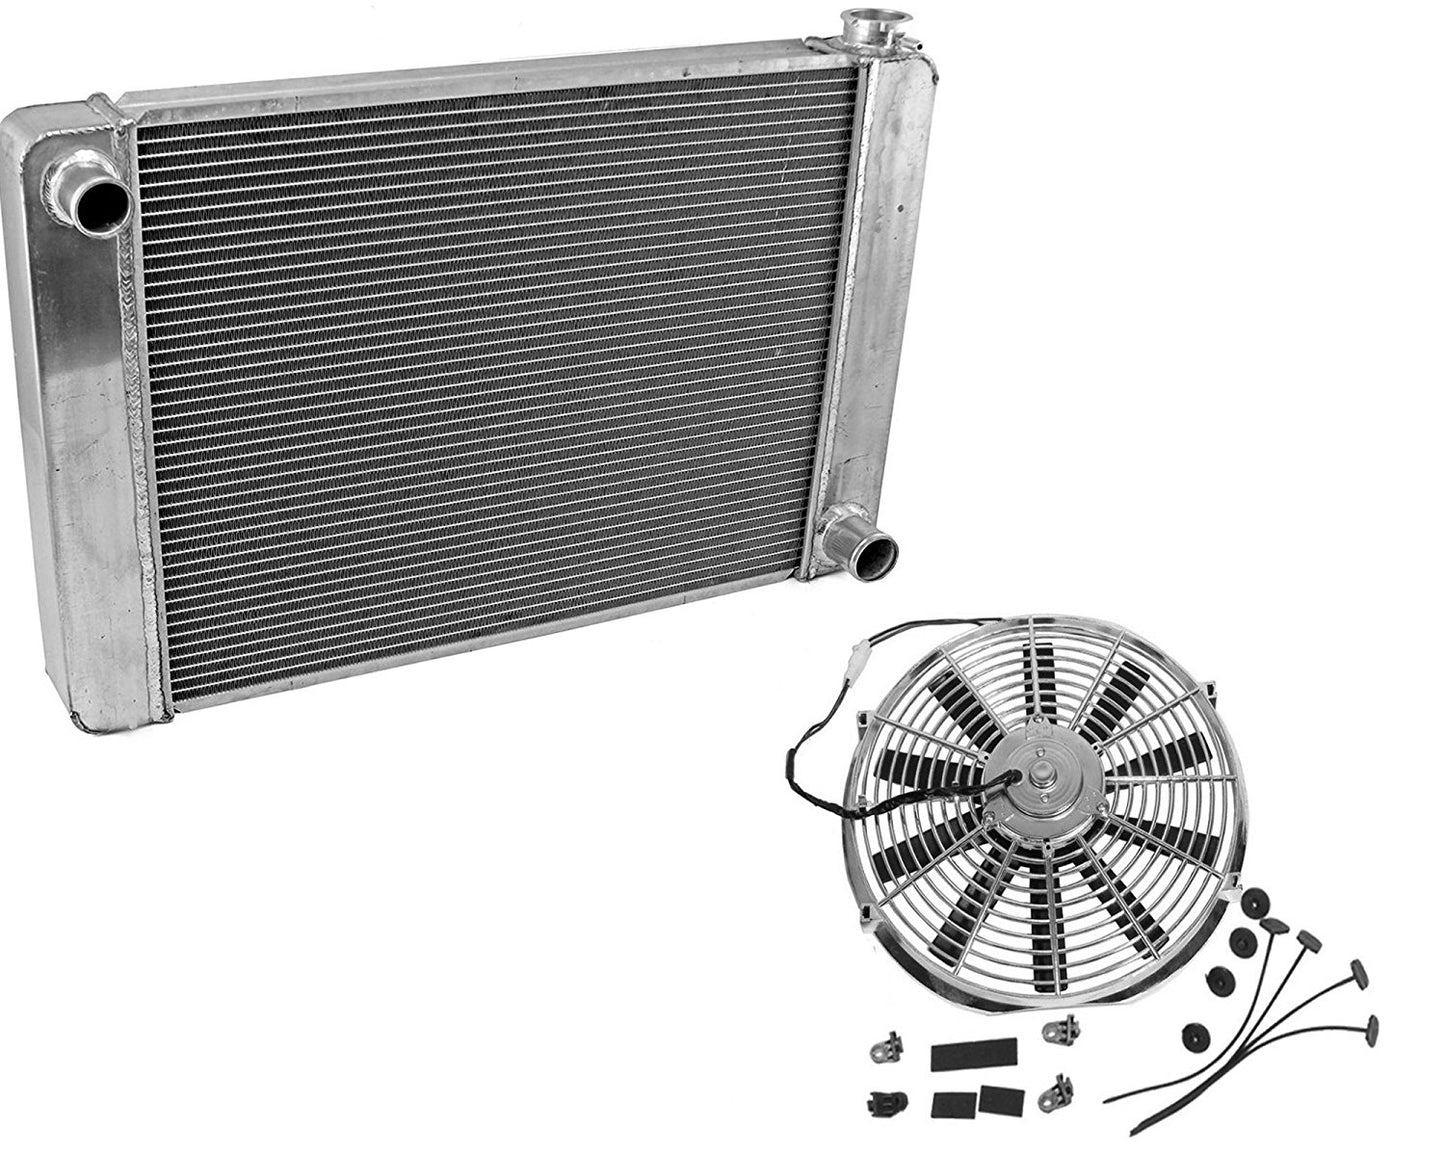 For SBC BBC Chevy GM Fabricated Aluminum Radiator 21" x 19" x3"&16" Chrome Straight Blade Reversible Cooling Fan